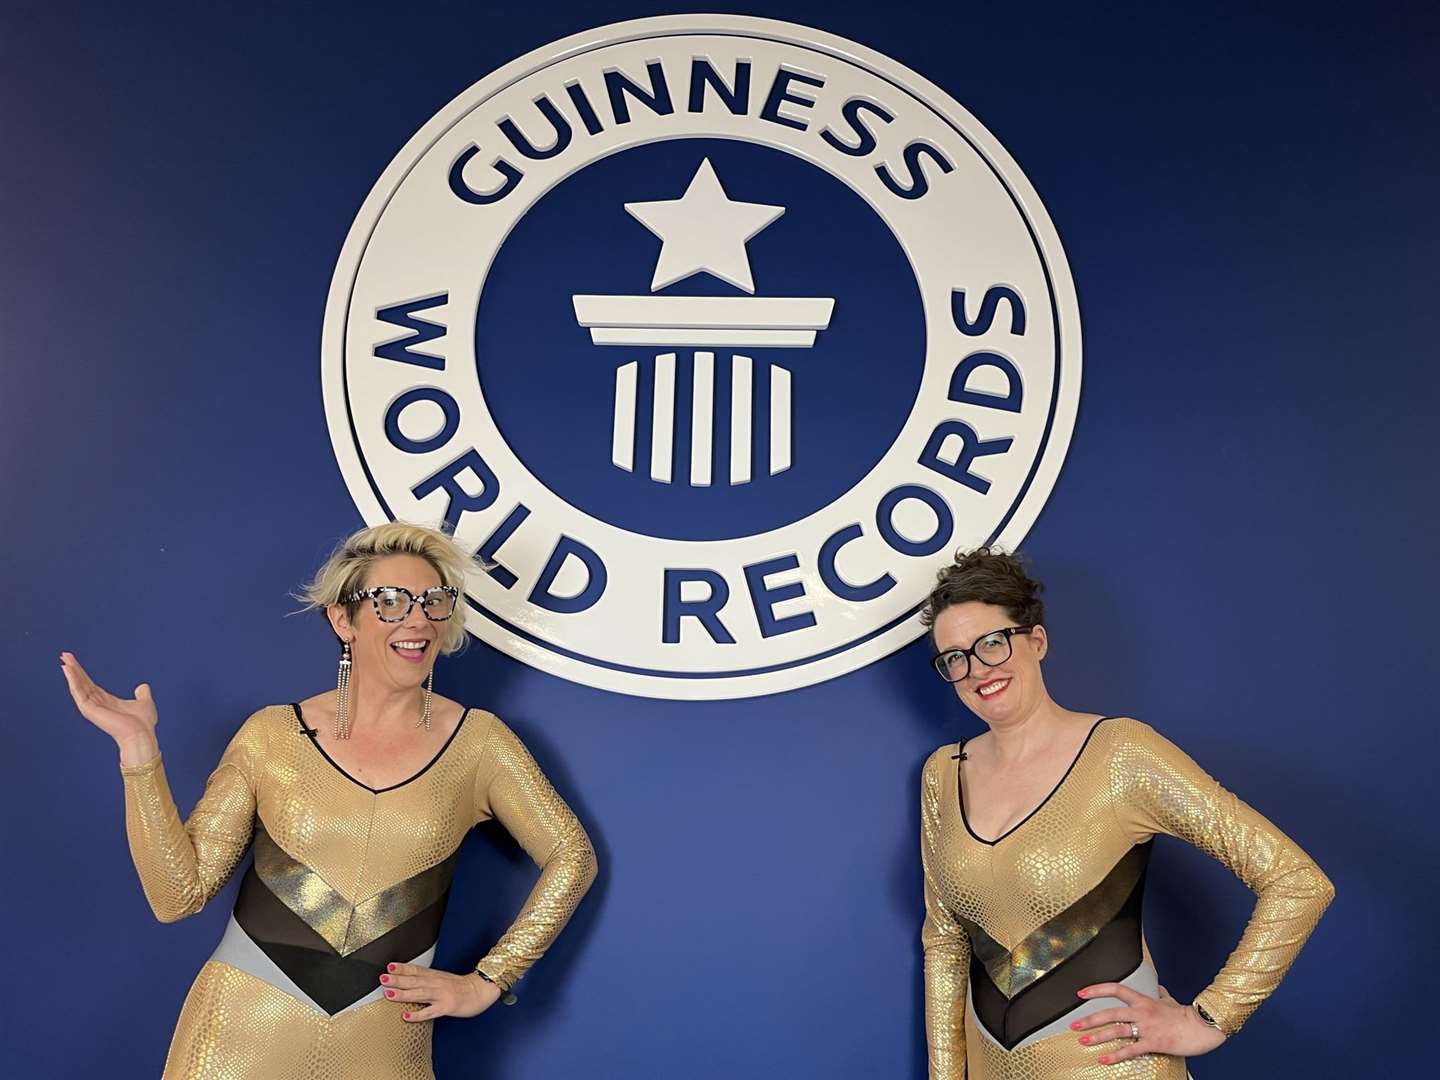 The pair had to contend with altitude sickness and sleepless nights to achieve the record (Ellie Gibson/Guinness World Records/PA)